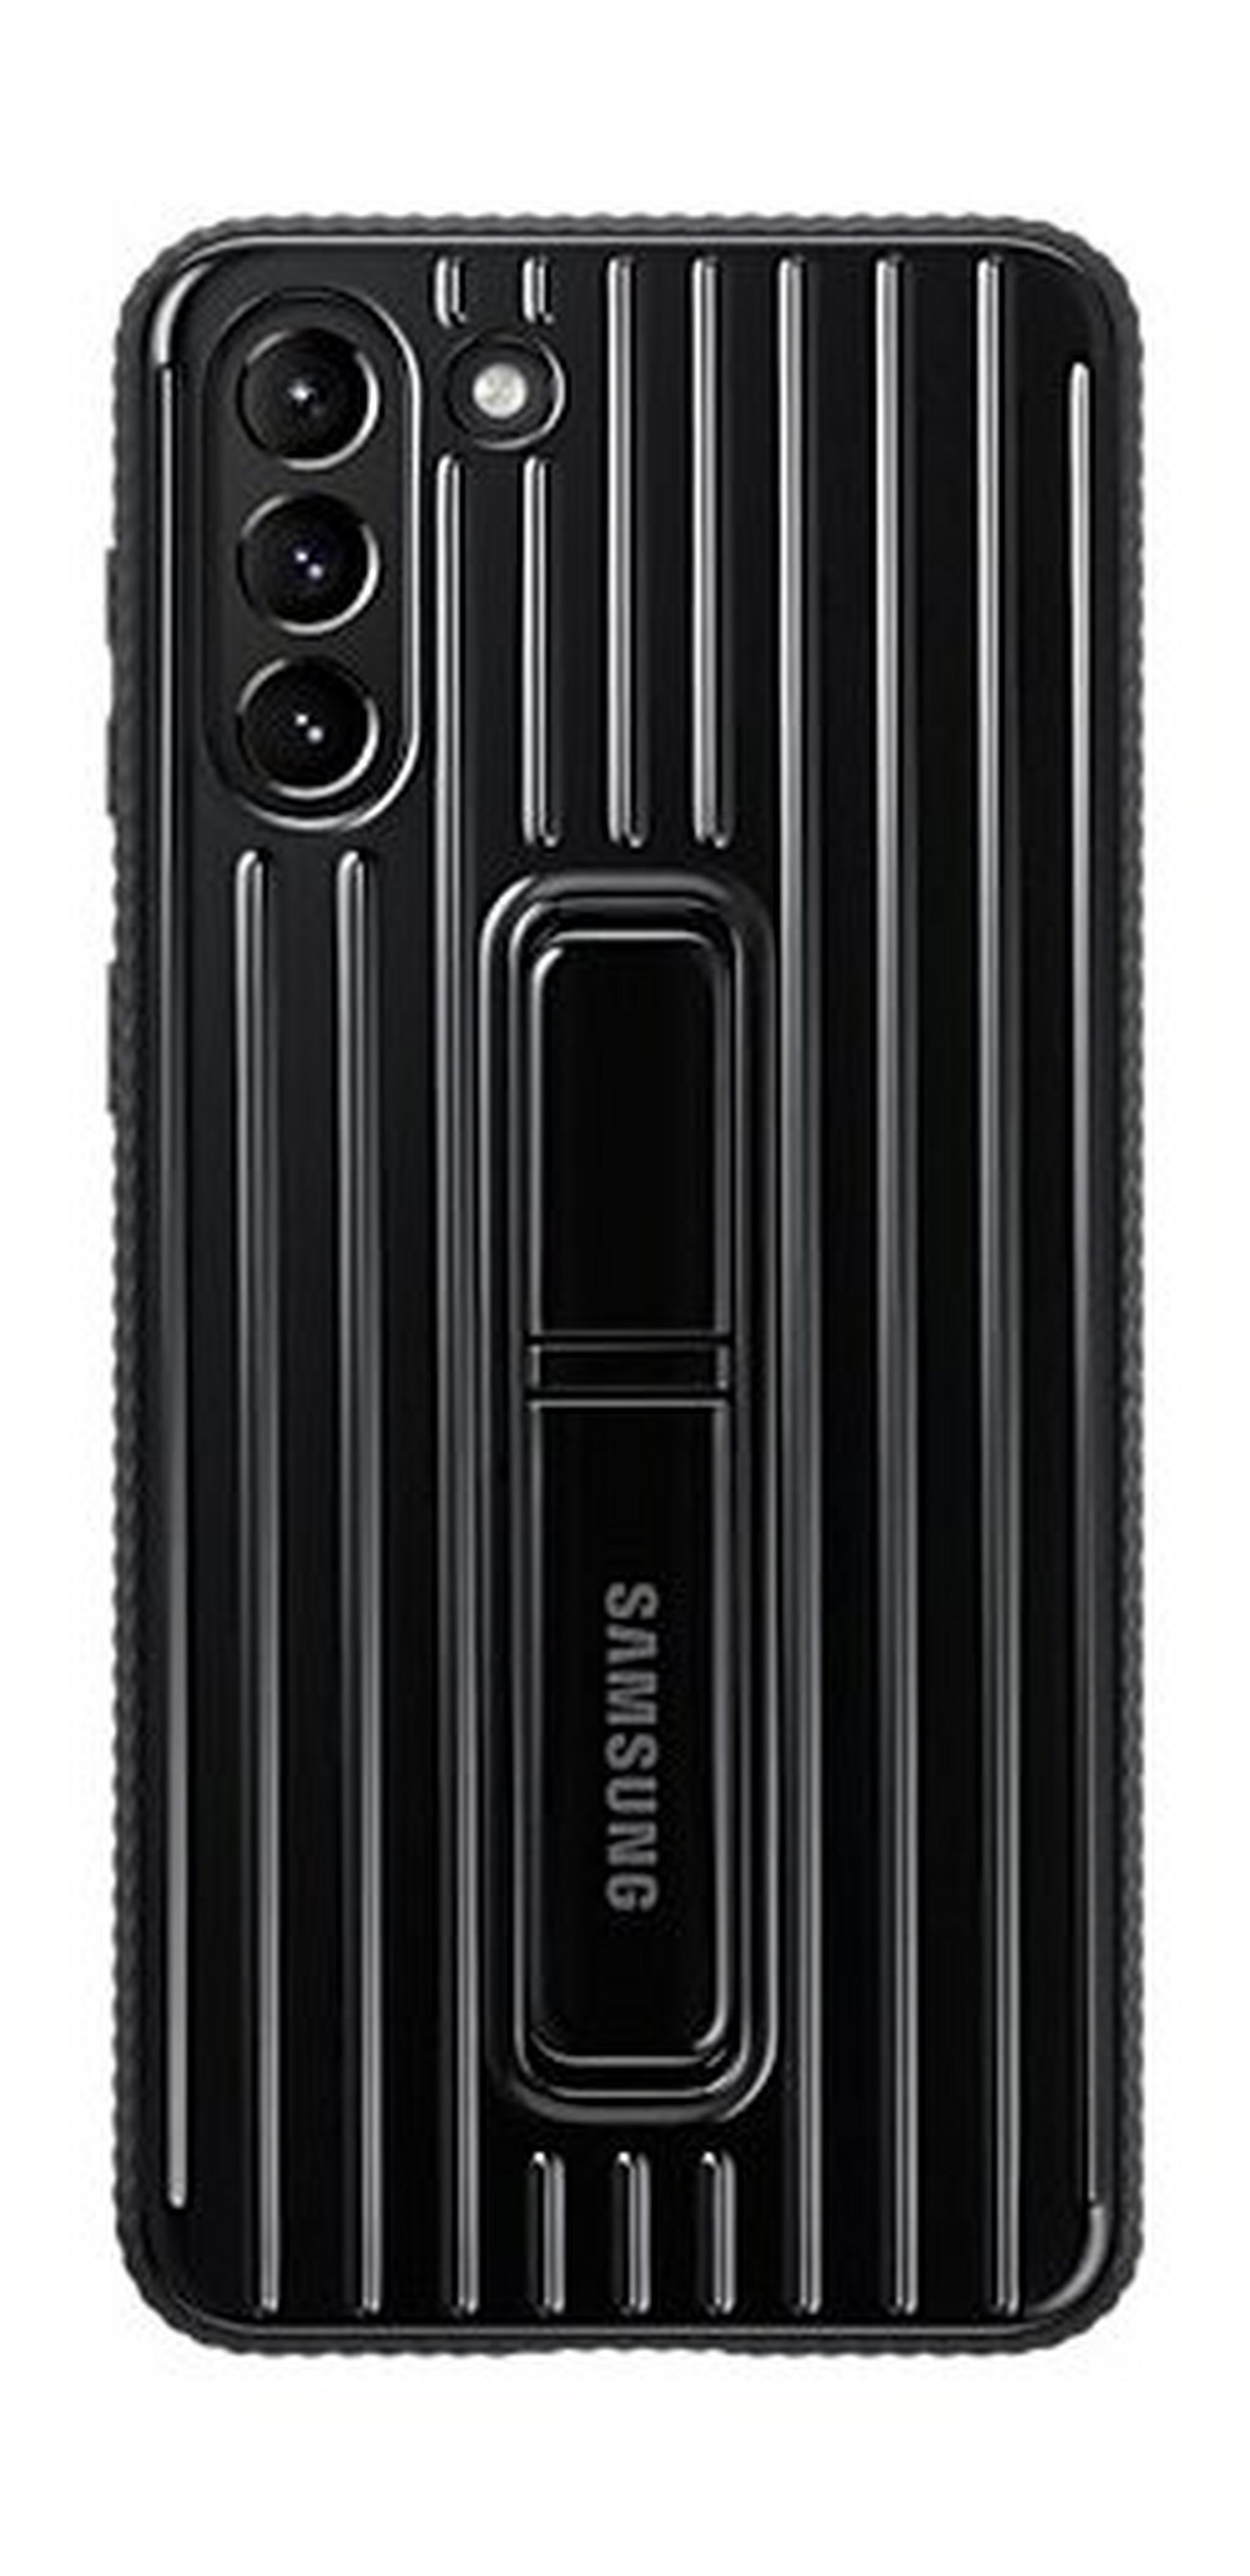 Samsung Galaxy S21+ Protective Standing Cover (RG996CB) - Black